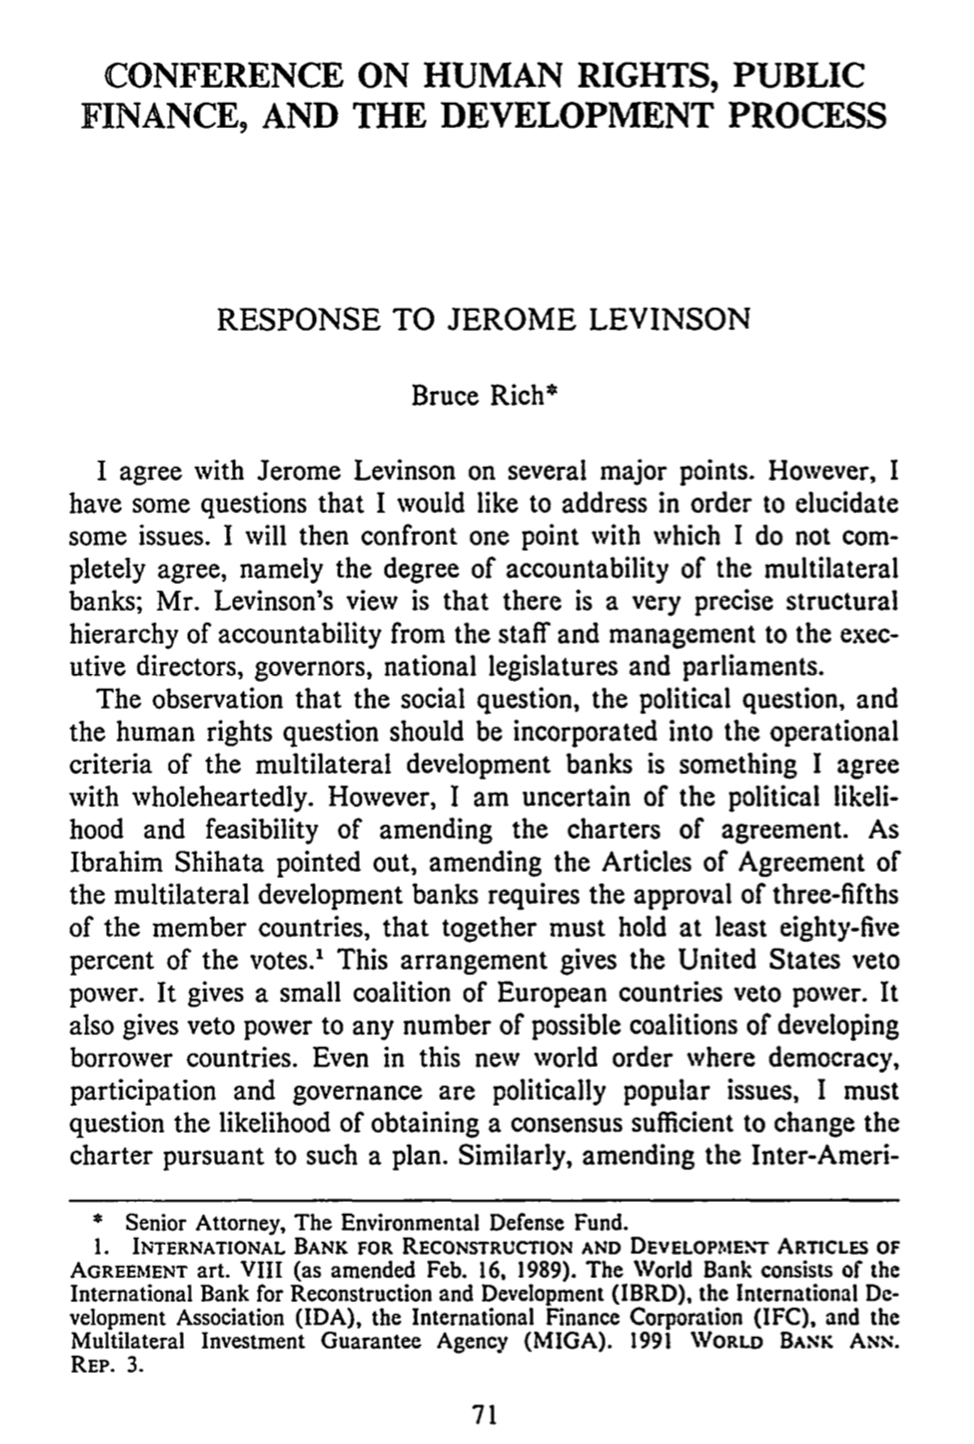 Response to Jerome Levinson [former Chief Counsel, Inter-American Development Bank}